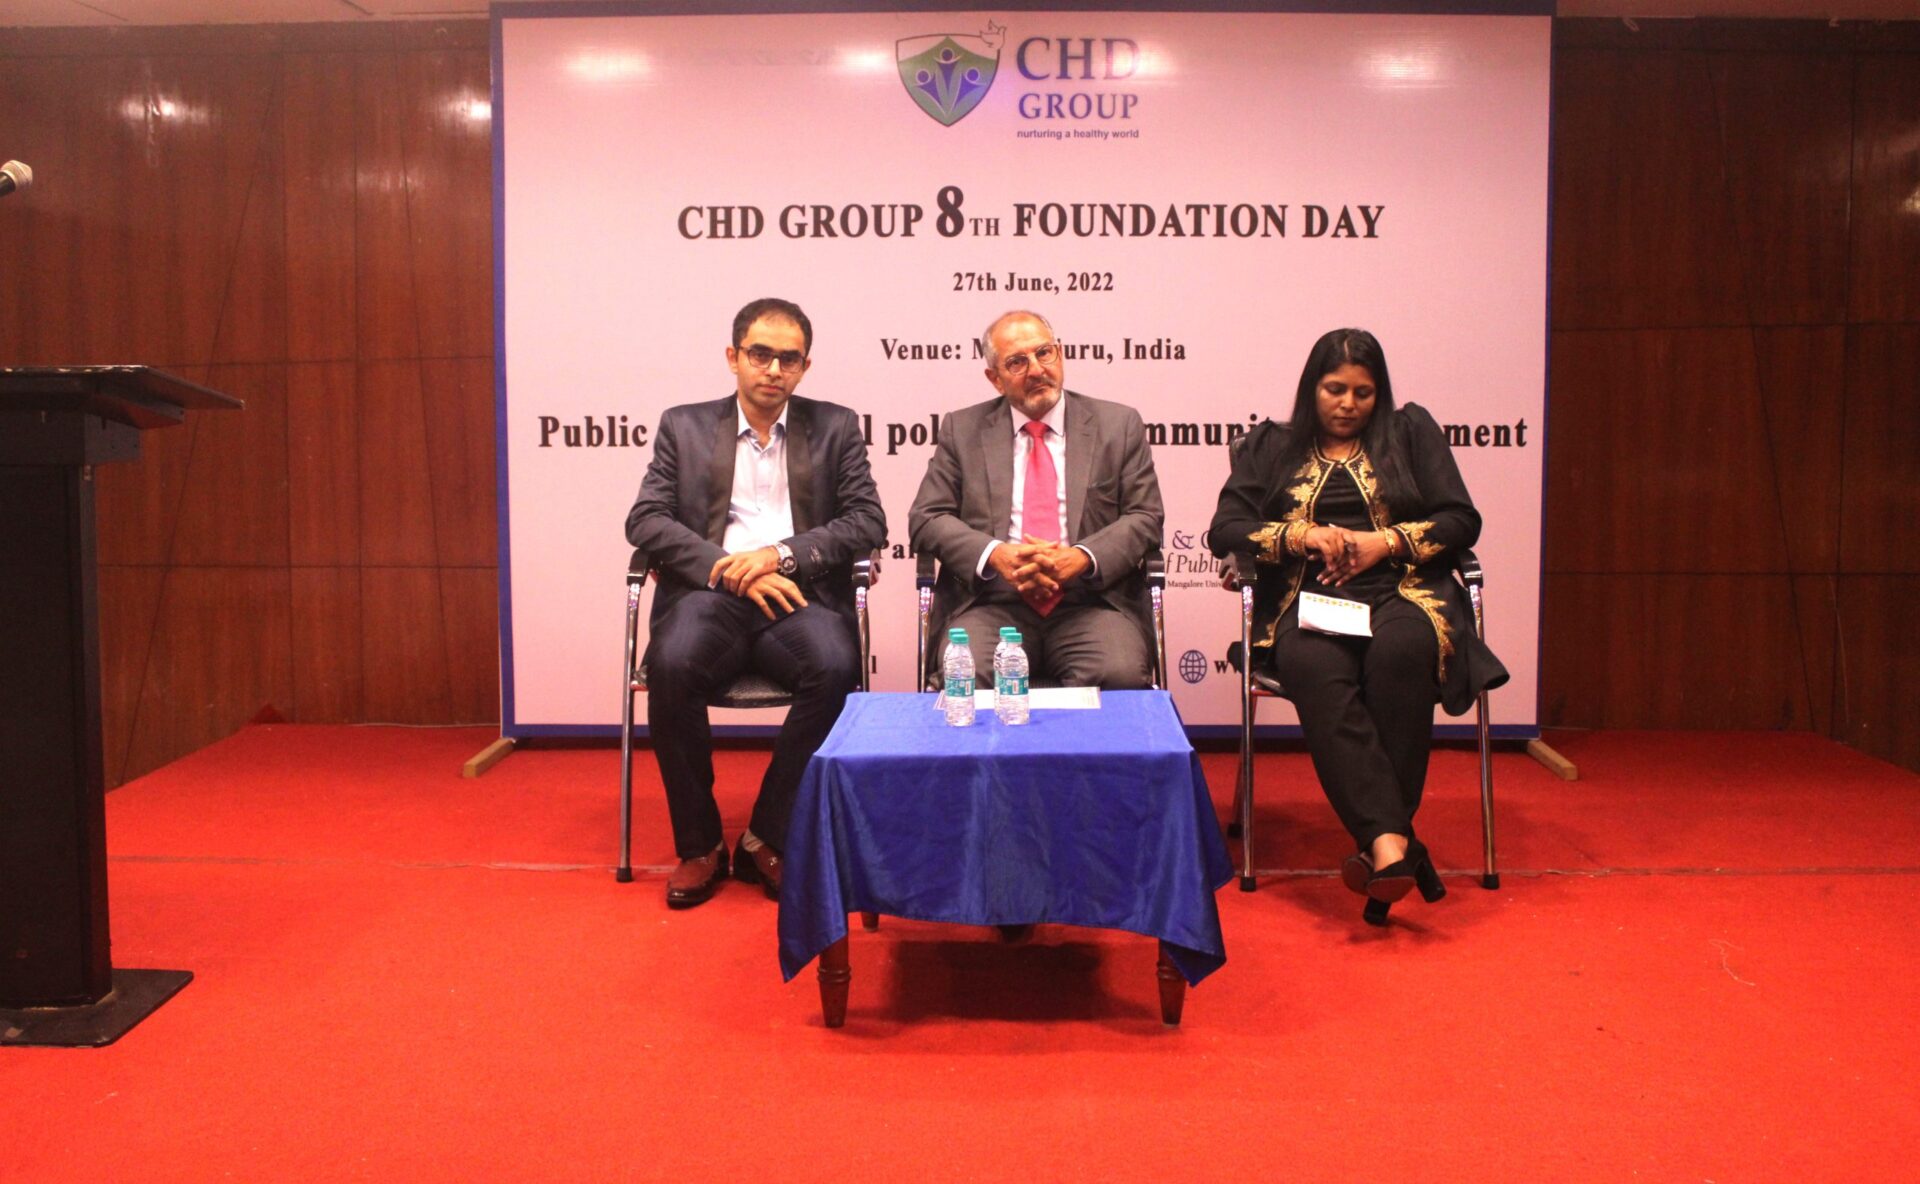 Public Health in all policies deliberated at CHD Group 8th Foundation Day